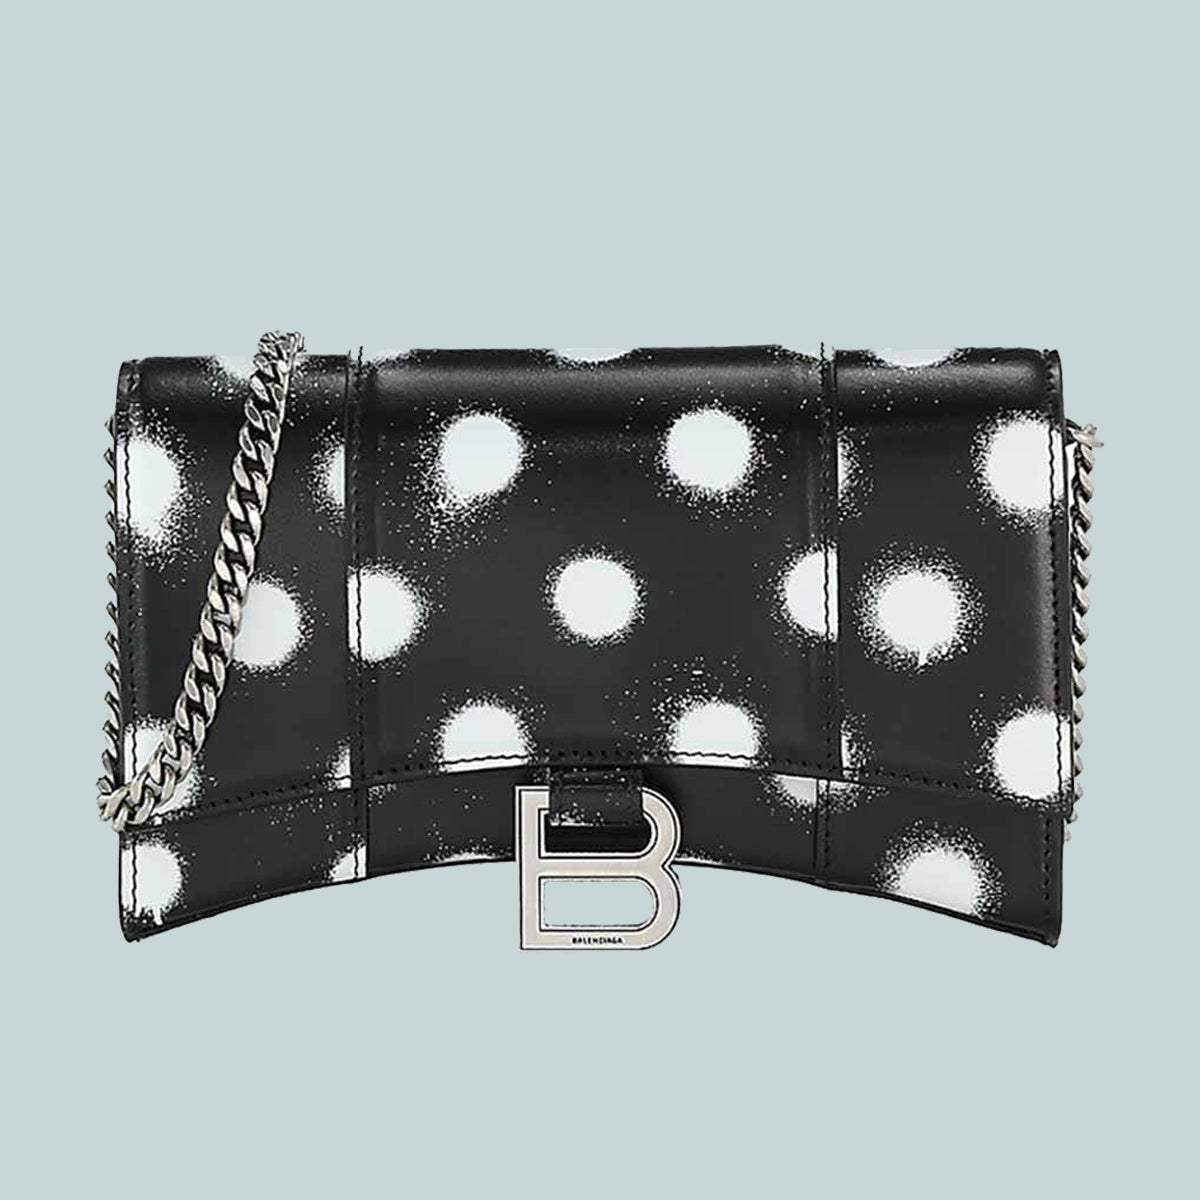 Hourglass wallet w/ chain Sprayed Polka Dots Printed